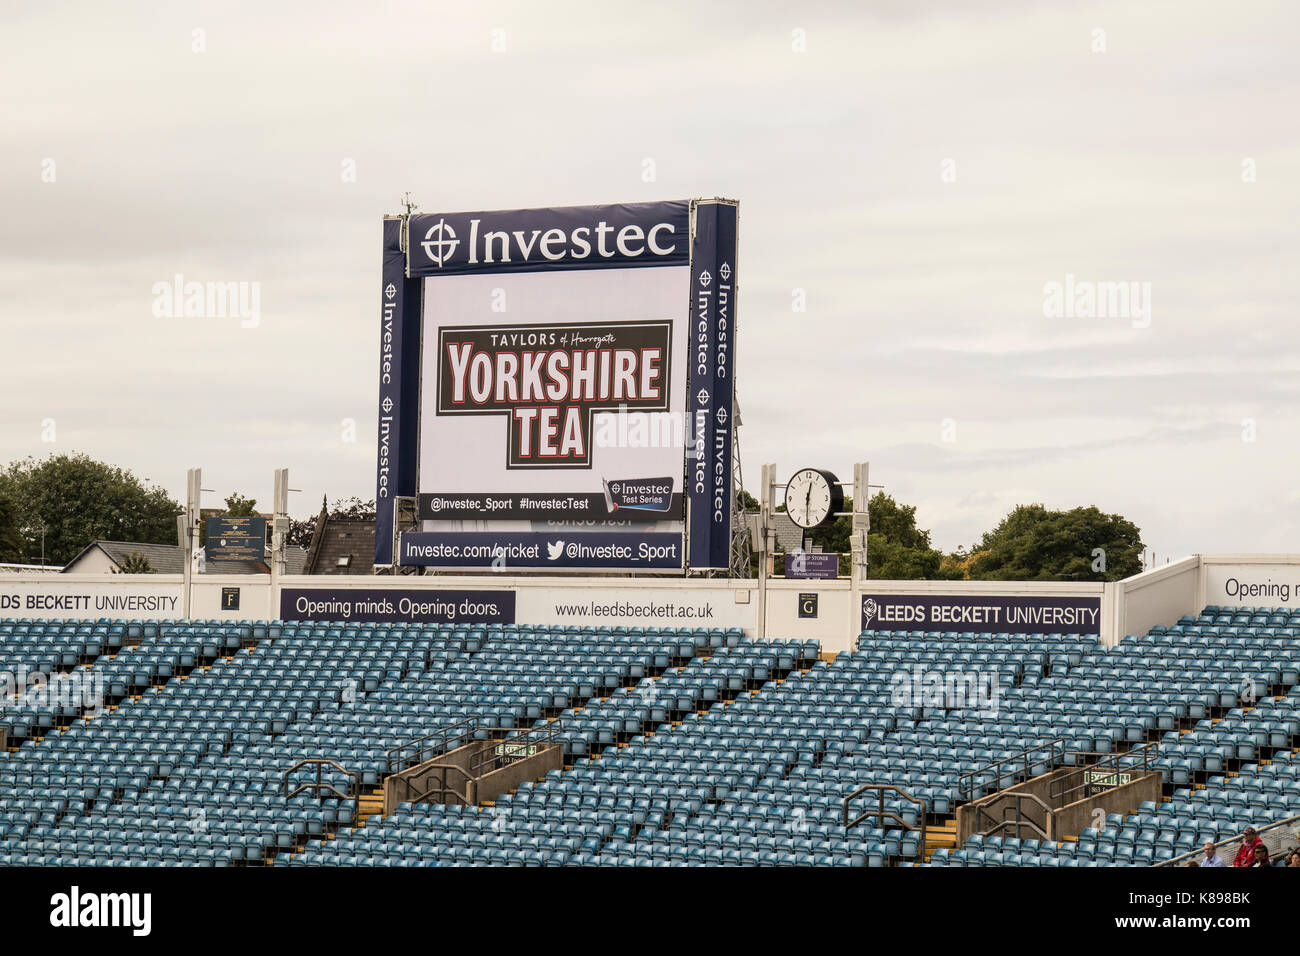 The Electronic video replay board at Headingley Cricket Ground, Leeds, showing advertising images and Investec - the sponsors. Stock Photo